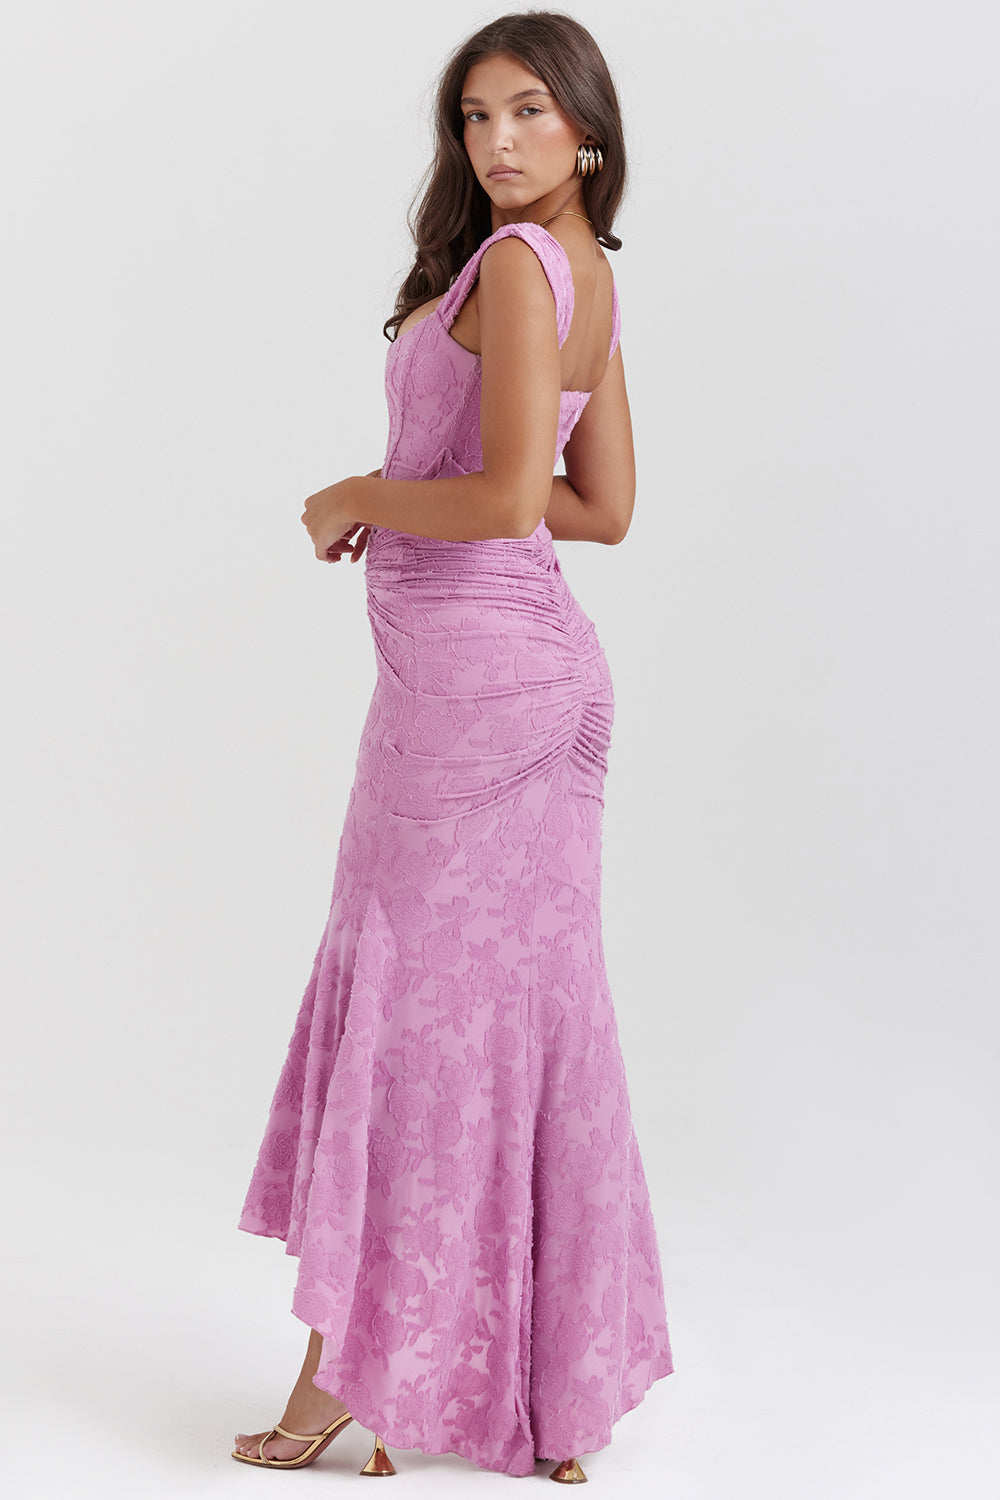 Hire HOUSE OF CB Cesca Rose Pink Floral Maxi Dress